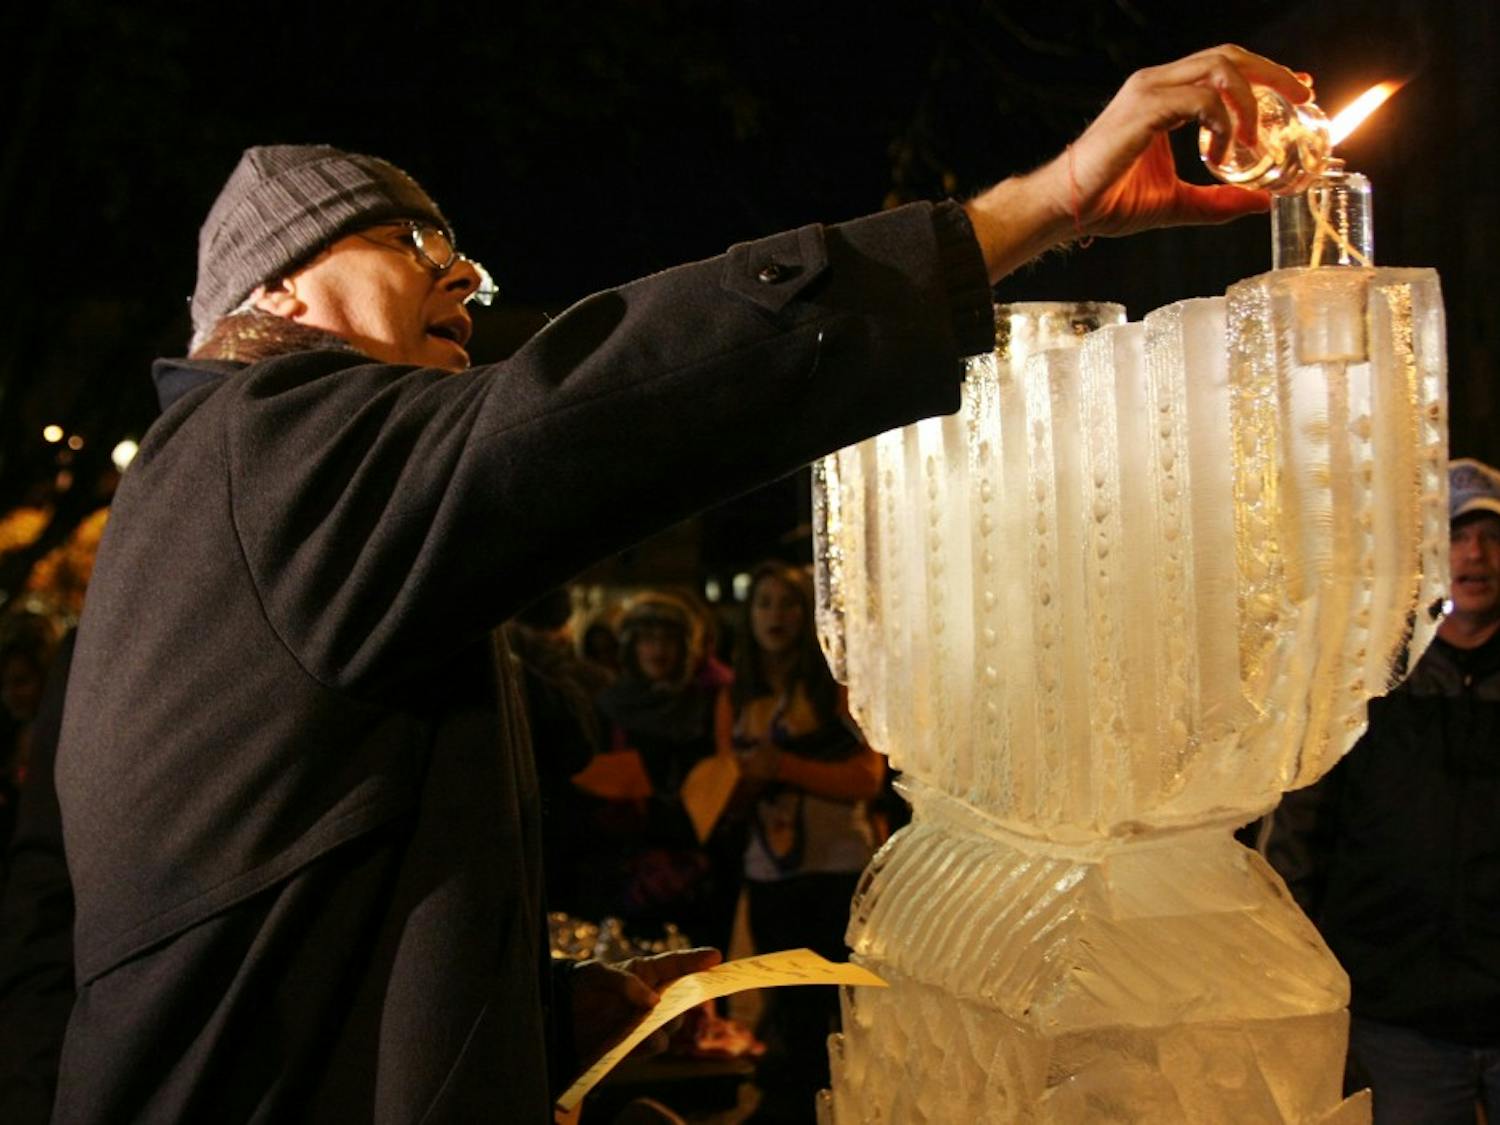 	Hanoch Labowitz of Miami lights the first candle on a giant ice sculpture of a menorah before a large crowd in the Pit on Wednesday evening. Students and community members gathered to celebrate the first day of Hanukkah with members of Chabad of Chapel Hill. Activities included crafts for kids, singing, free food and a live performance by Gmish, a klezmer band.  